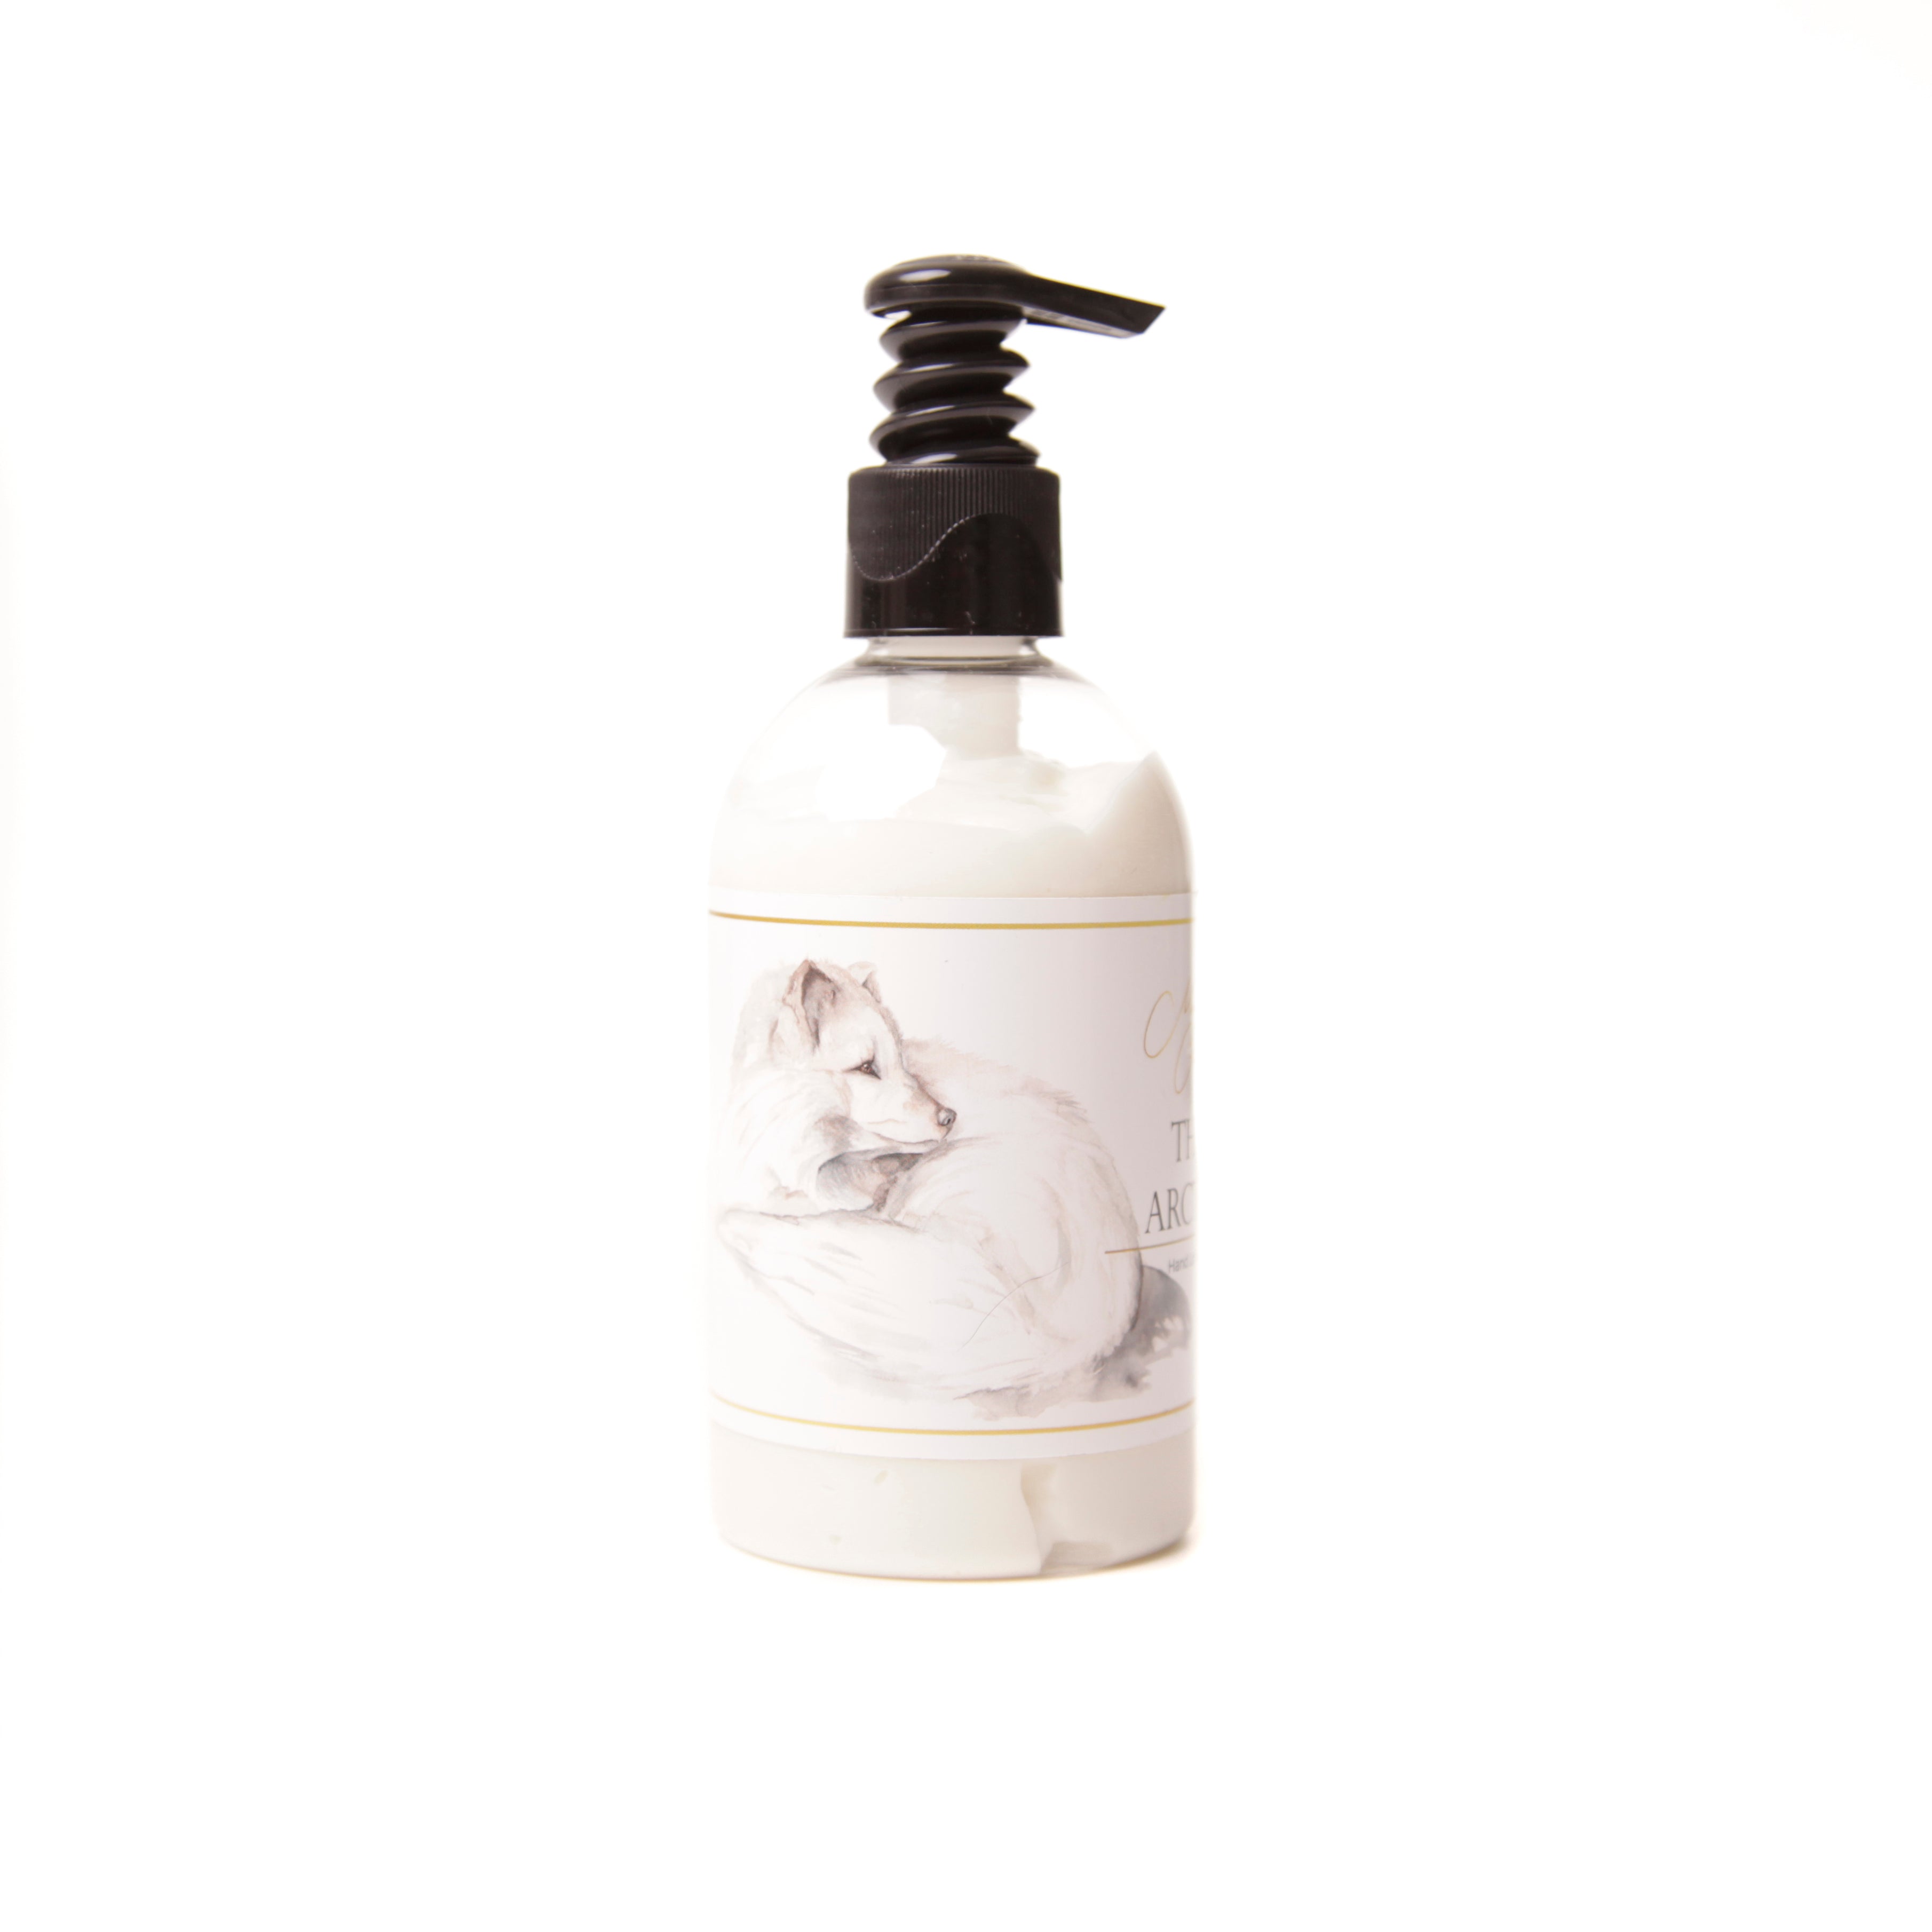 The Arctic' Hand Lotion with Arctic Fox Design